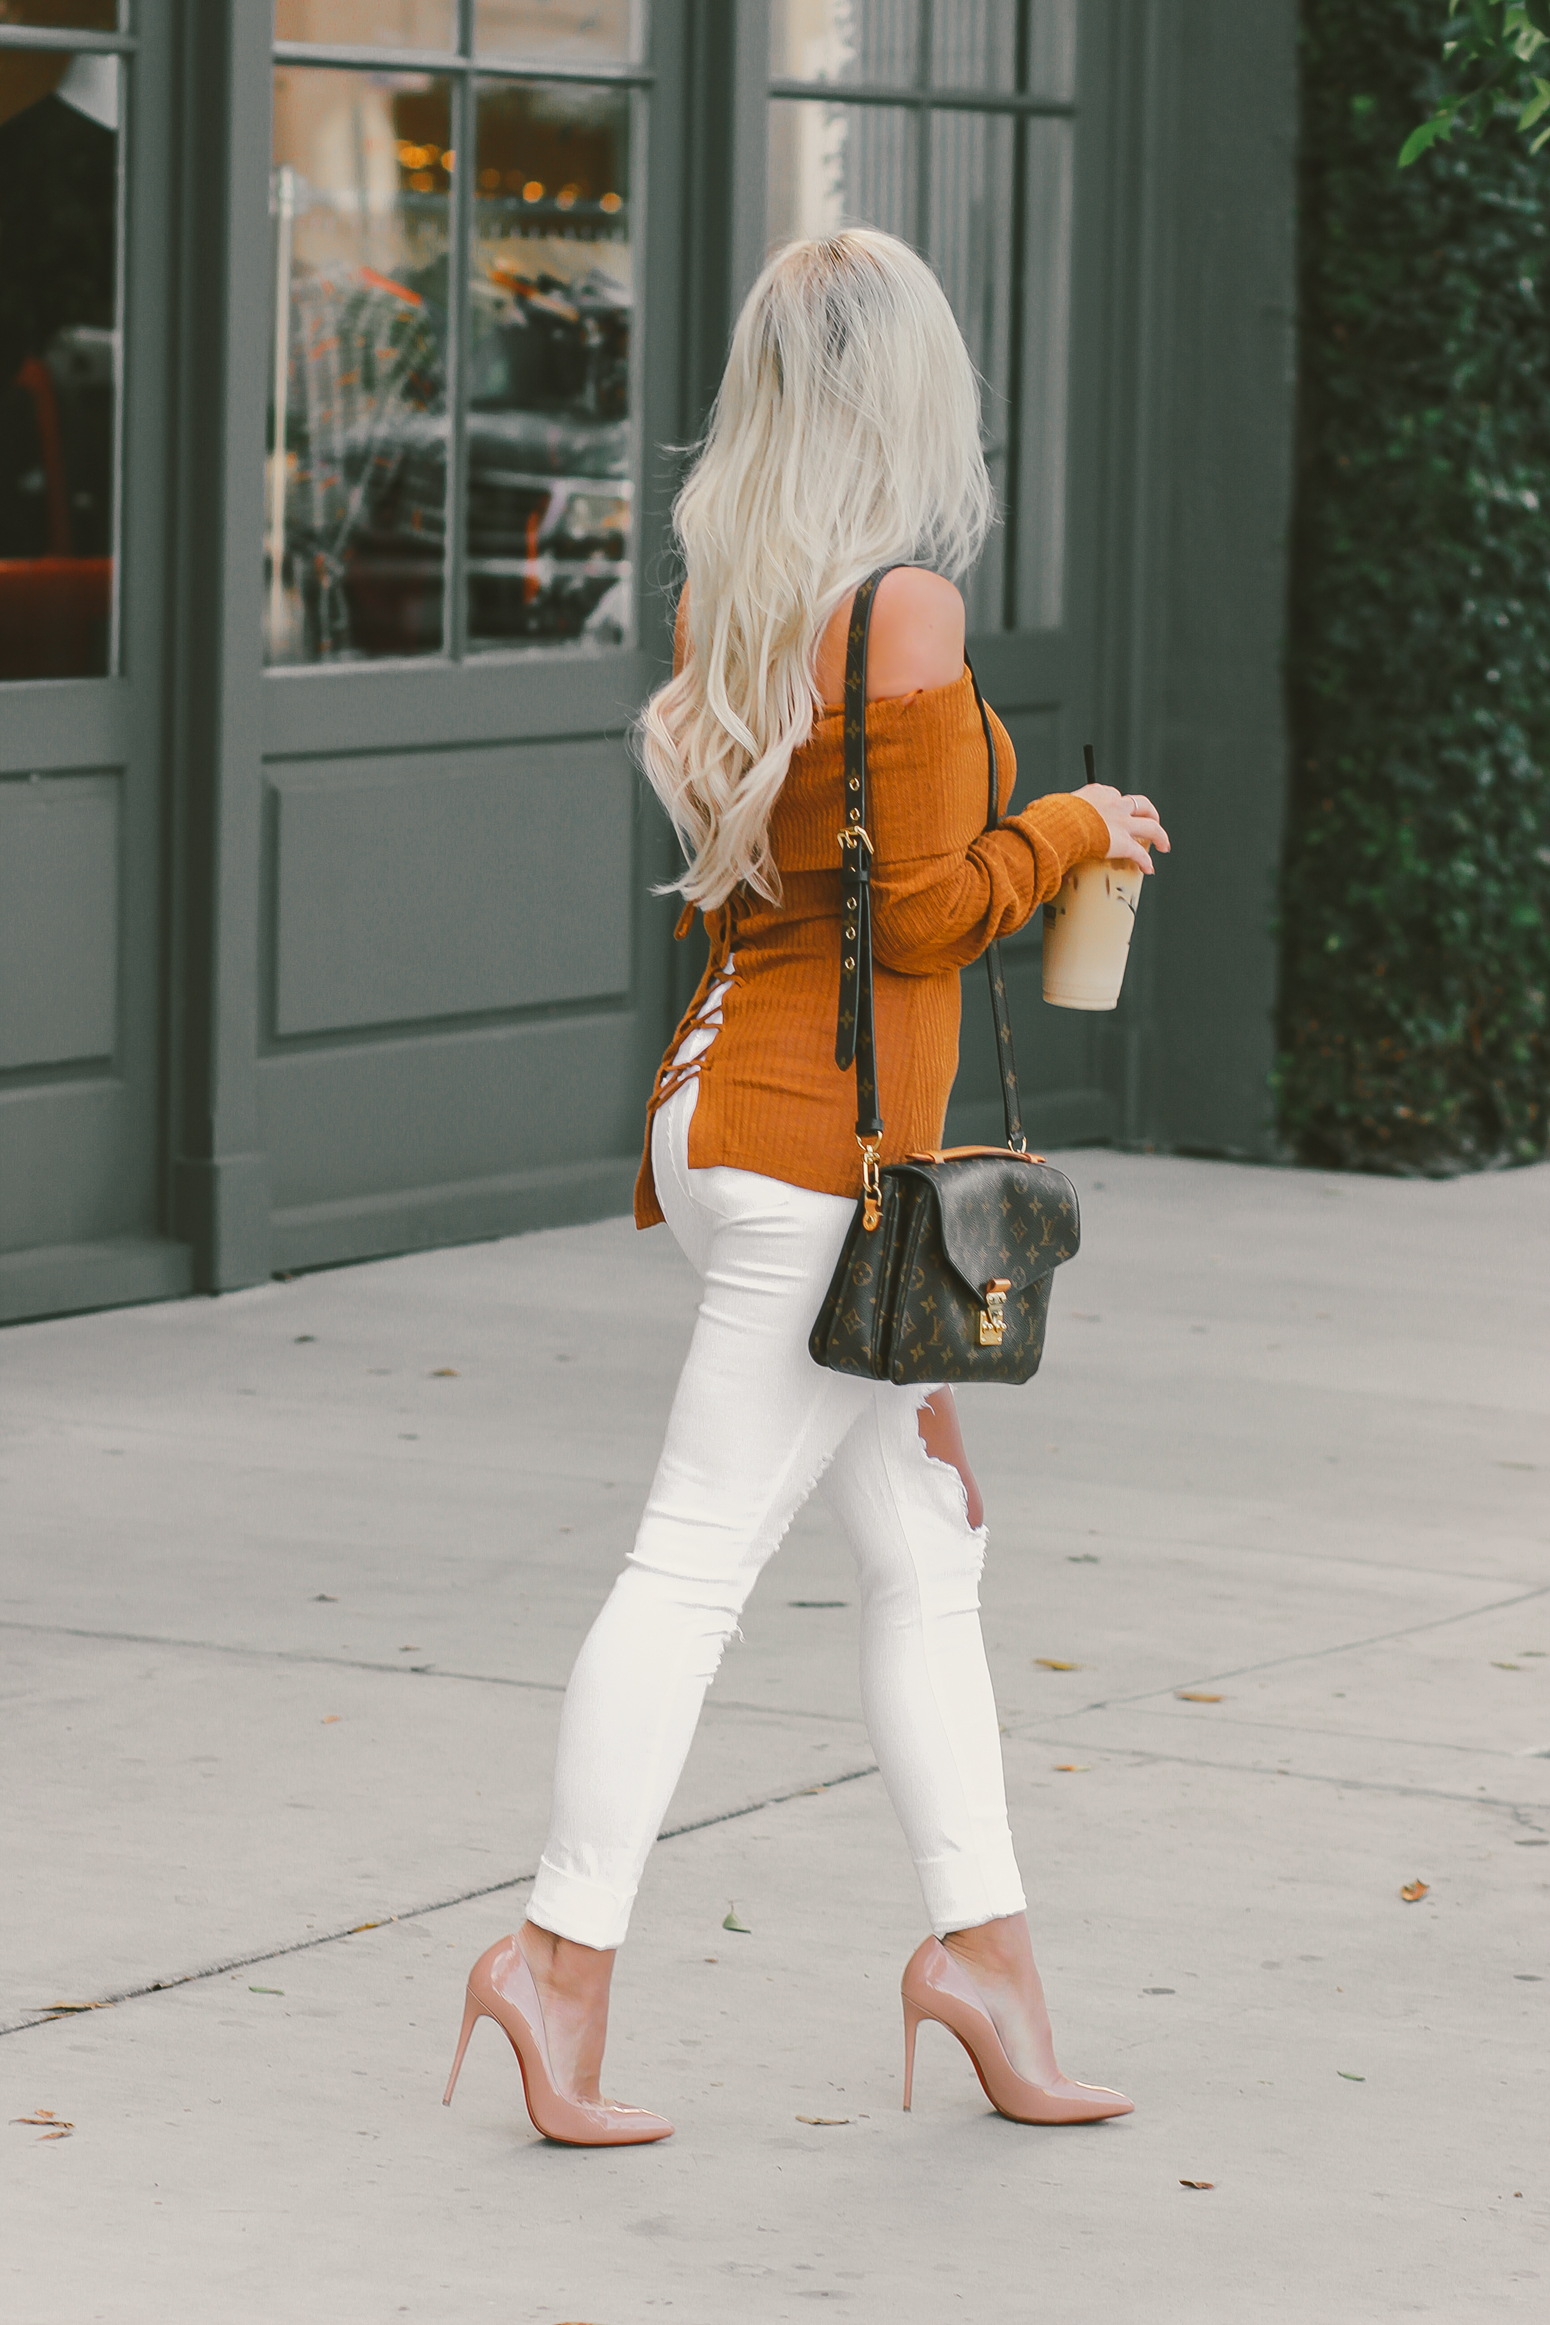 November Vibes | Off The Shoulder Sweater & White Distressed Denim @fashionnova | Blondie in the City